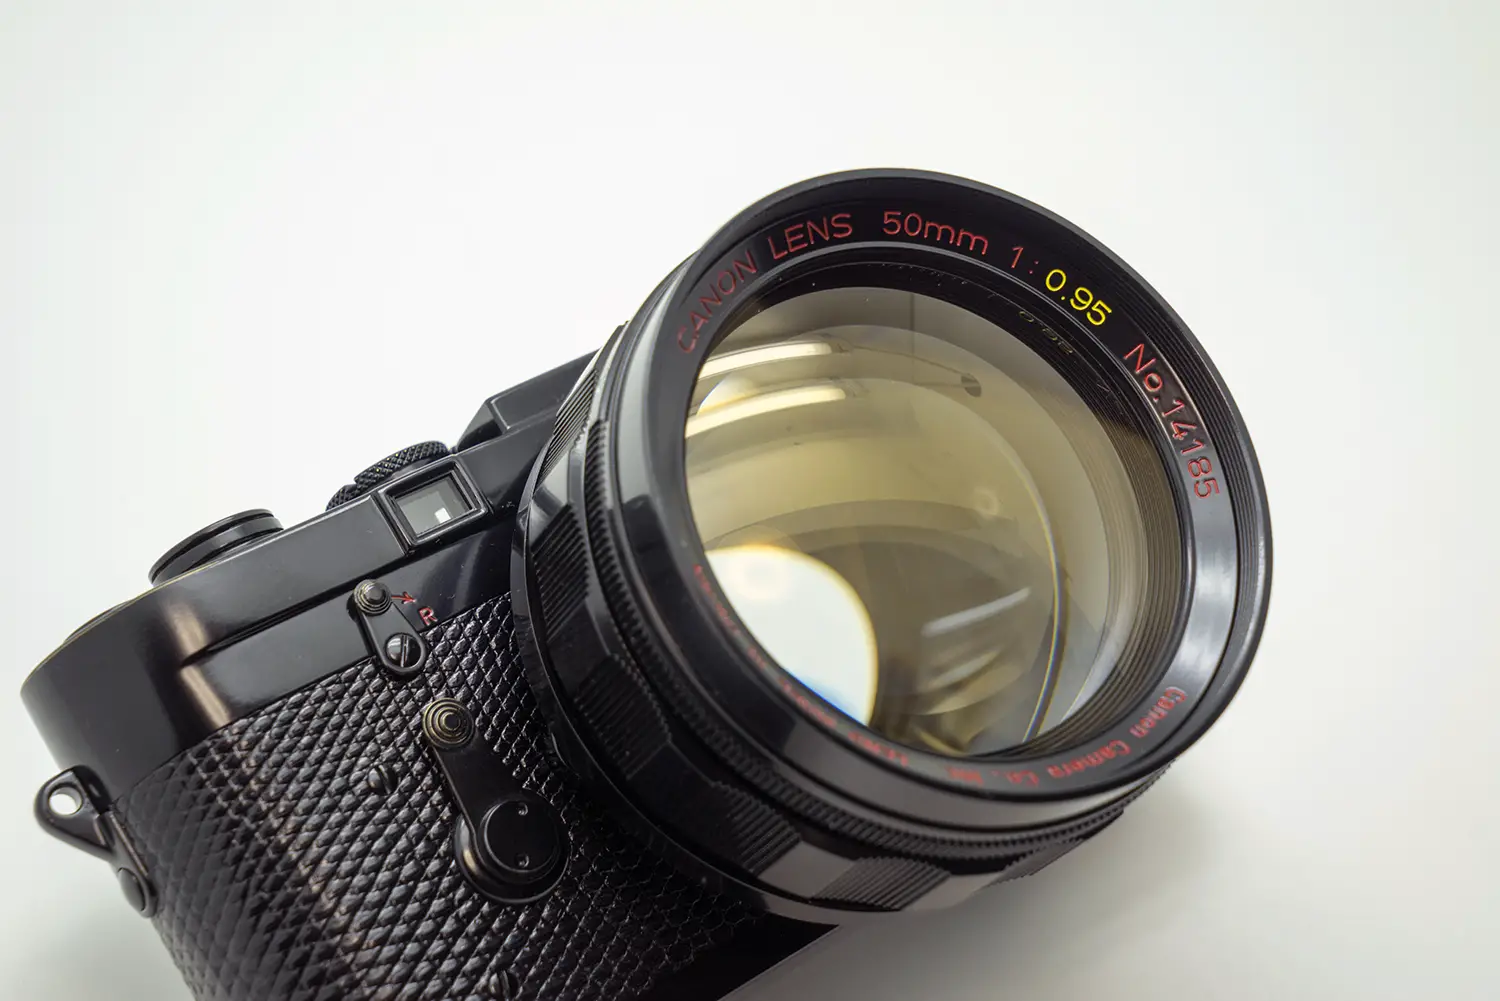 Cheap lens cleaning tissue vs expensive ones?: Open Talk Forum